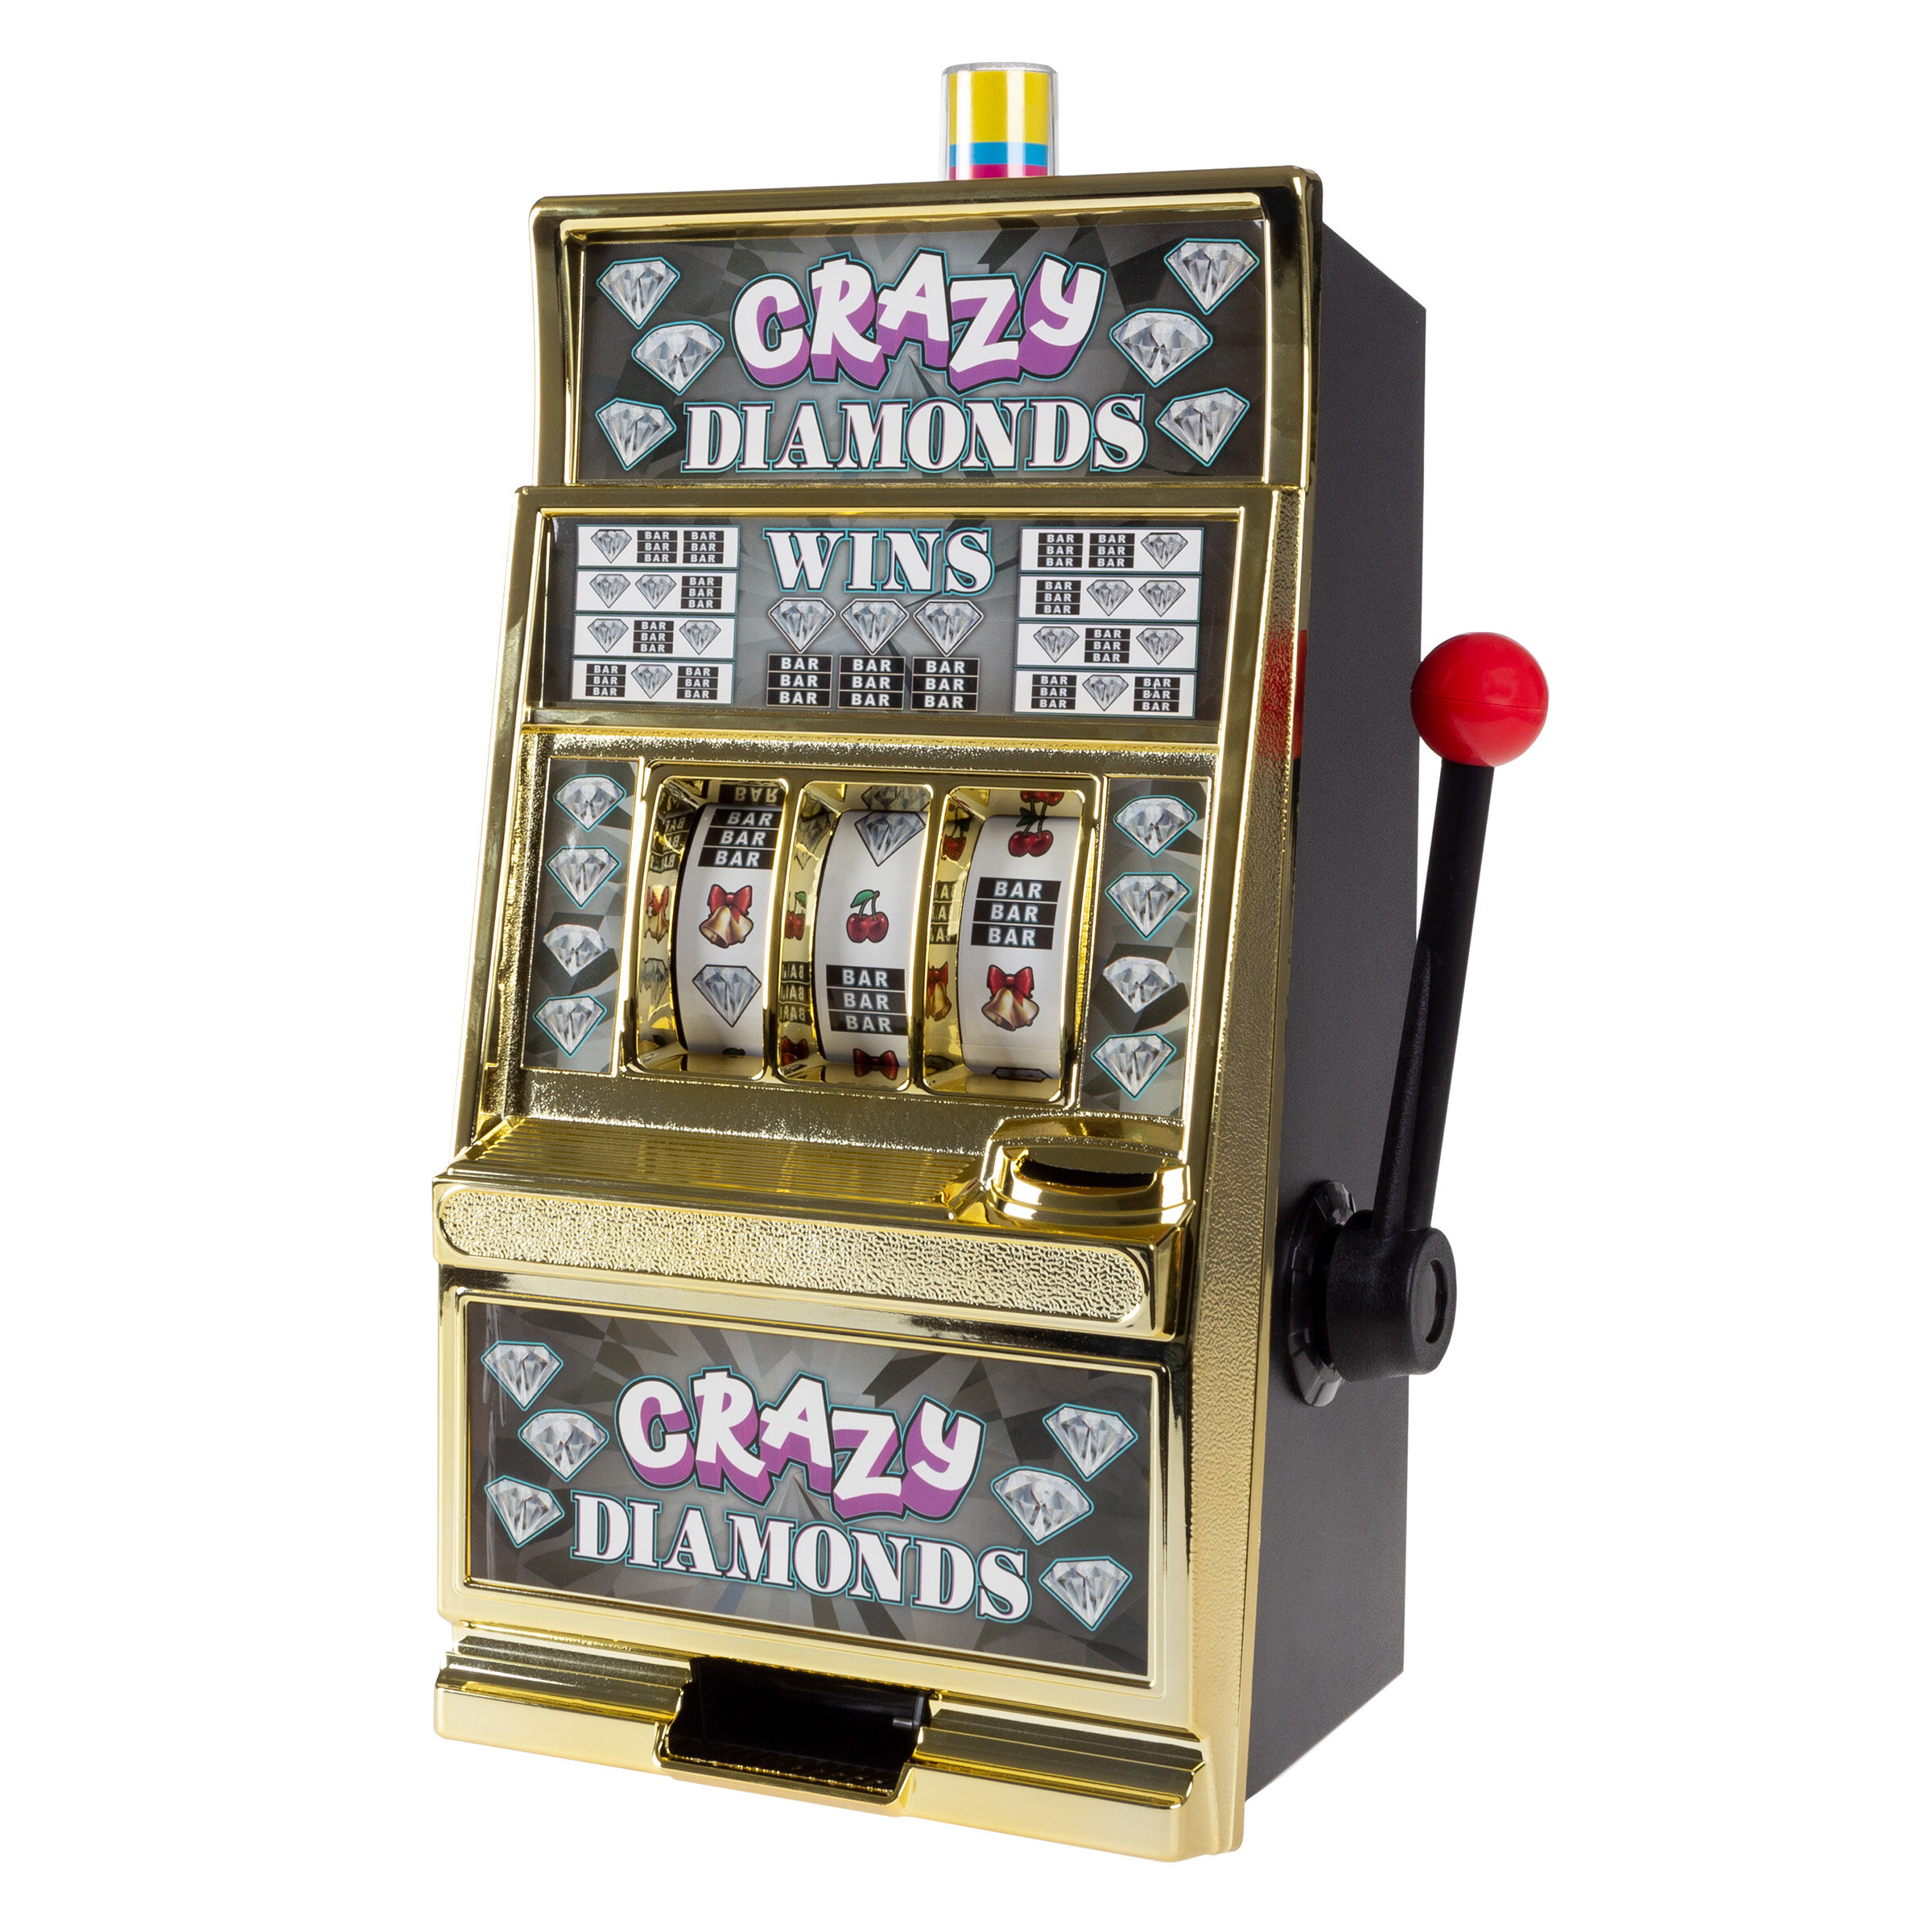 Crazy Diamonds Slot Machine Adult Home Casino Jackpot Game Spin Coin Bank Lotto 